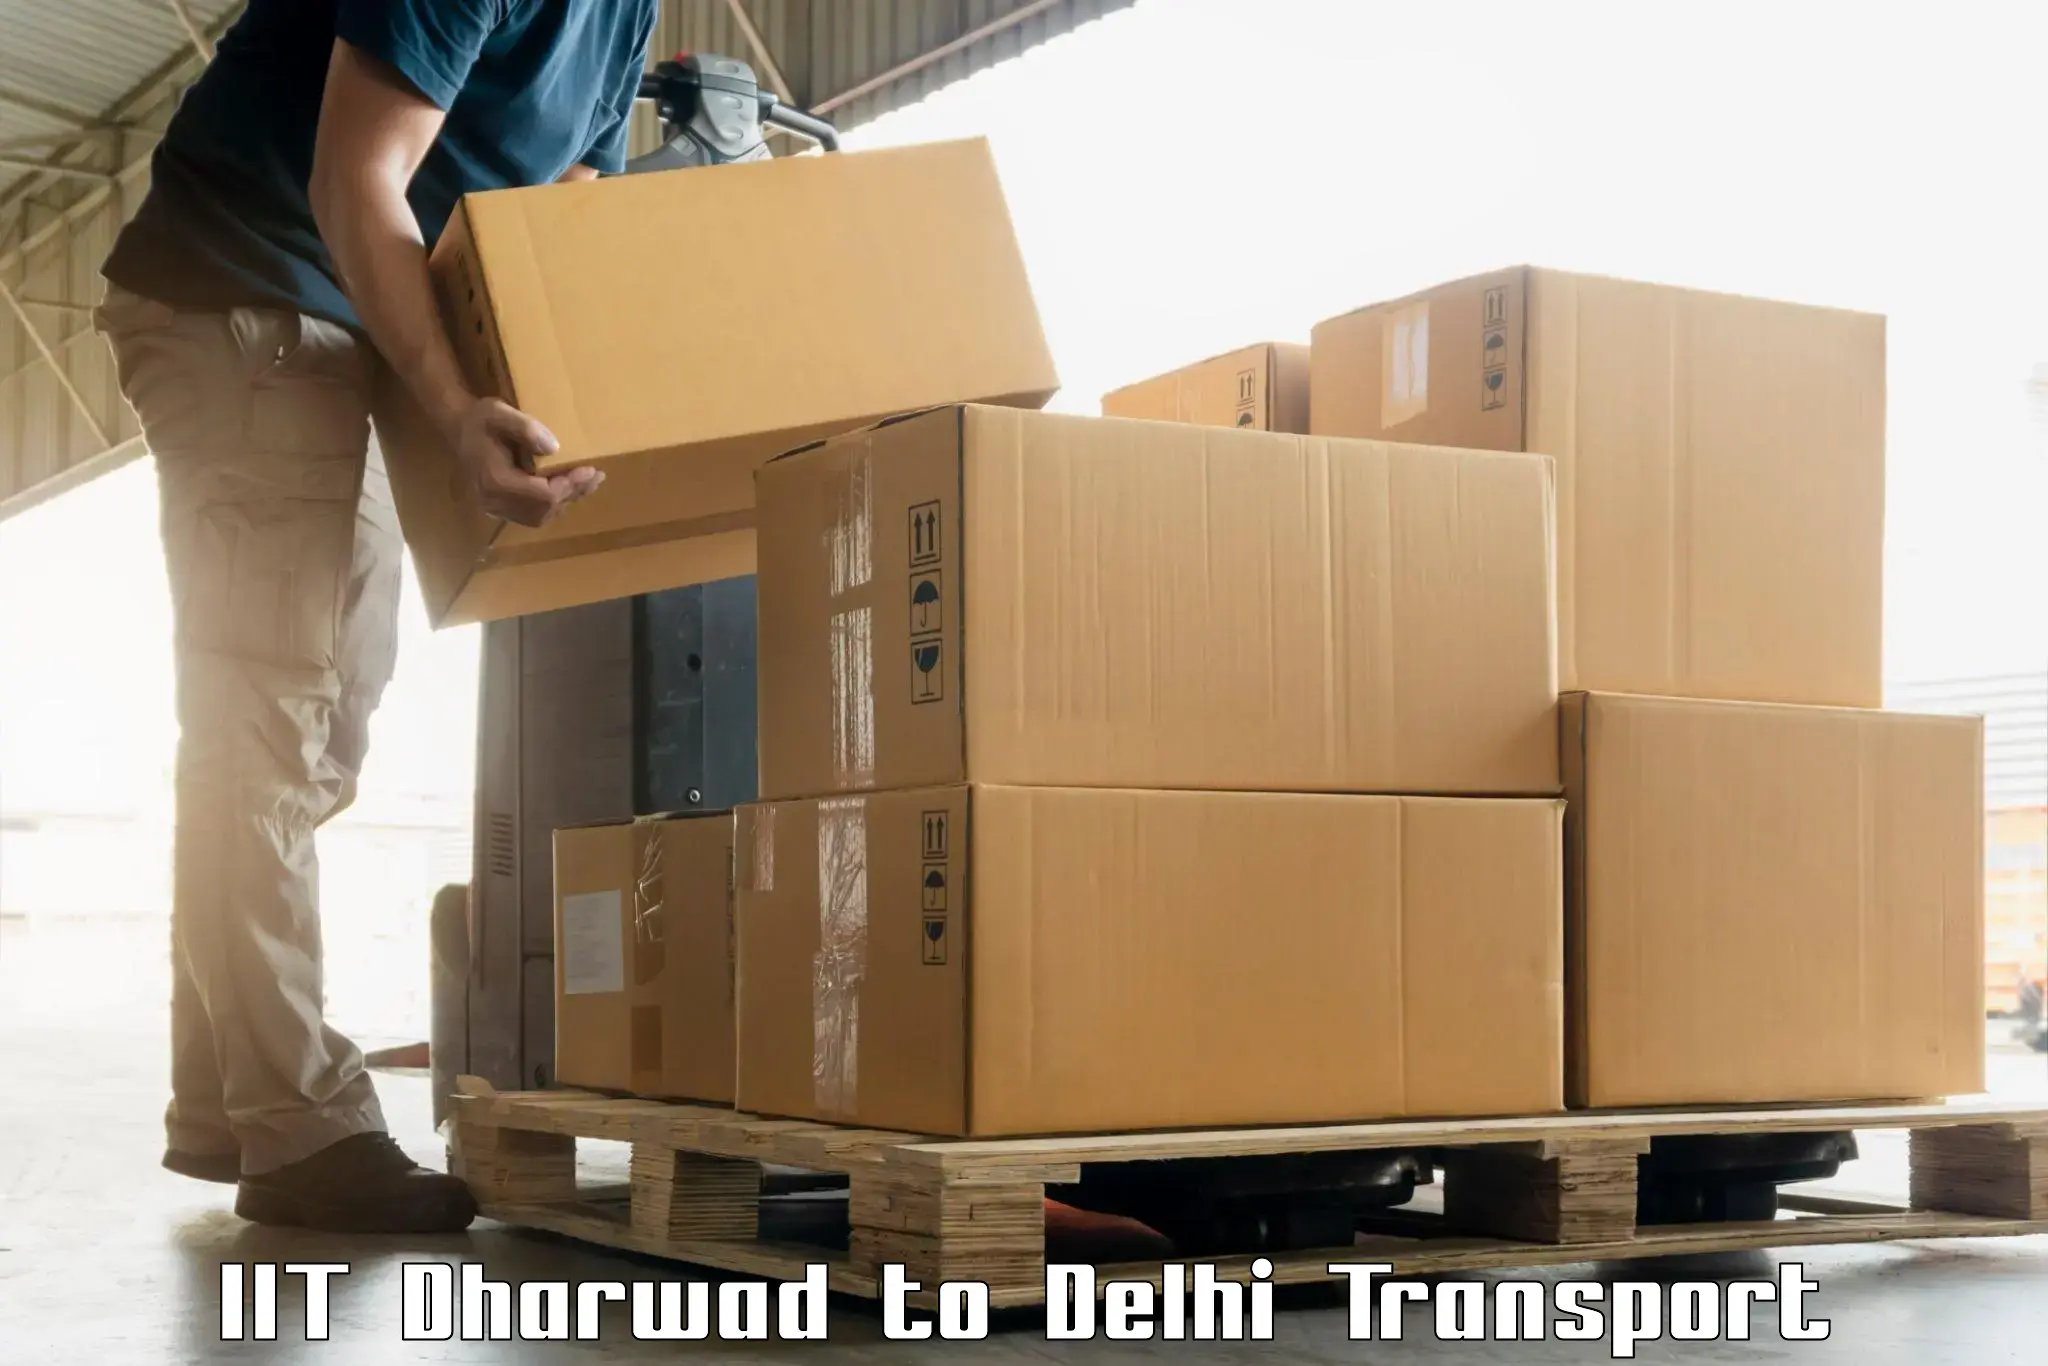 Air freight transport services IIT Dharwad to Delhi